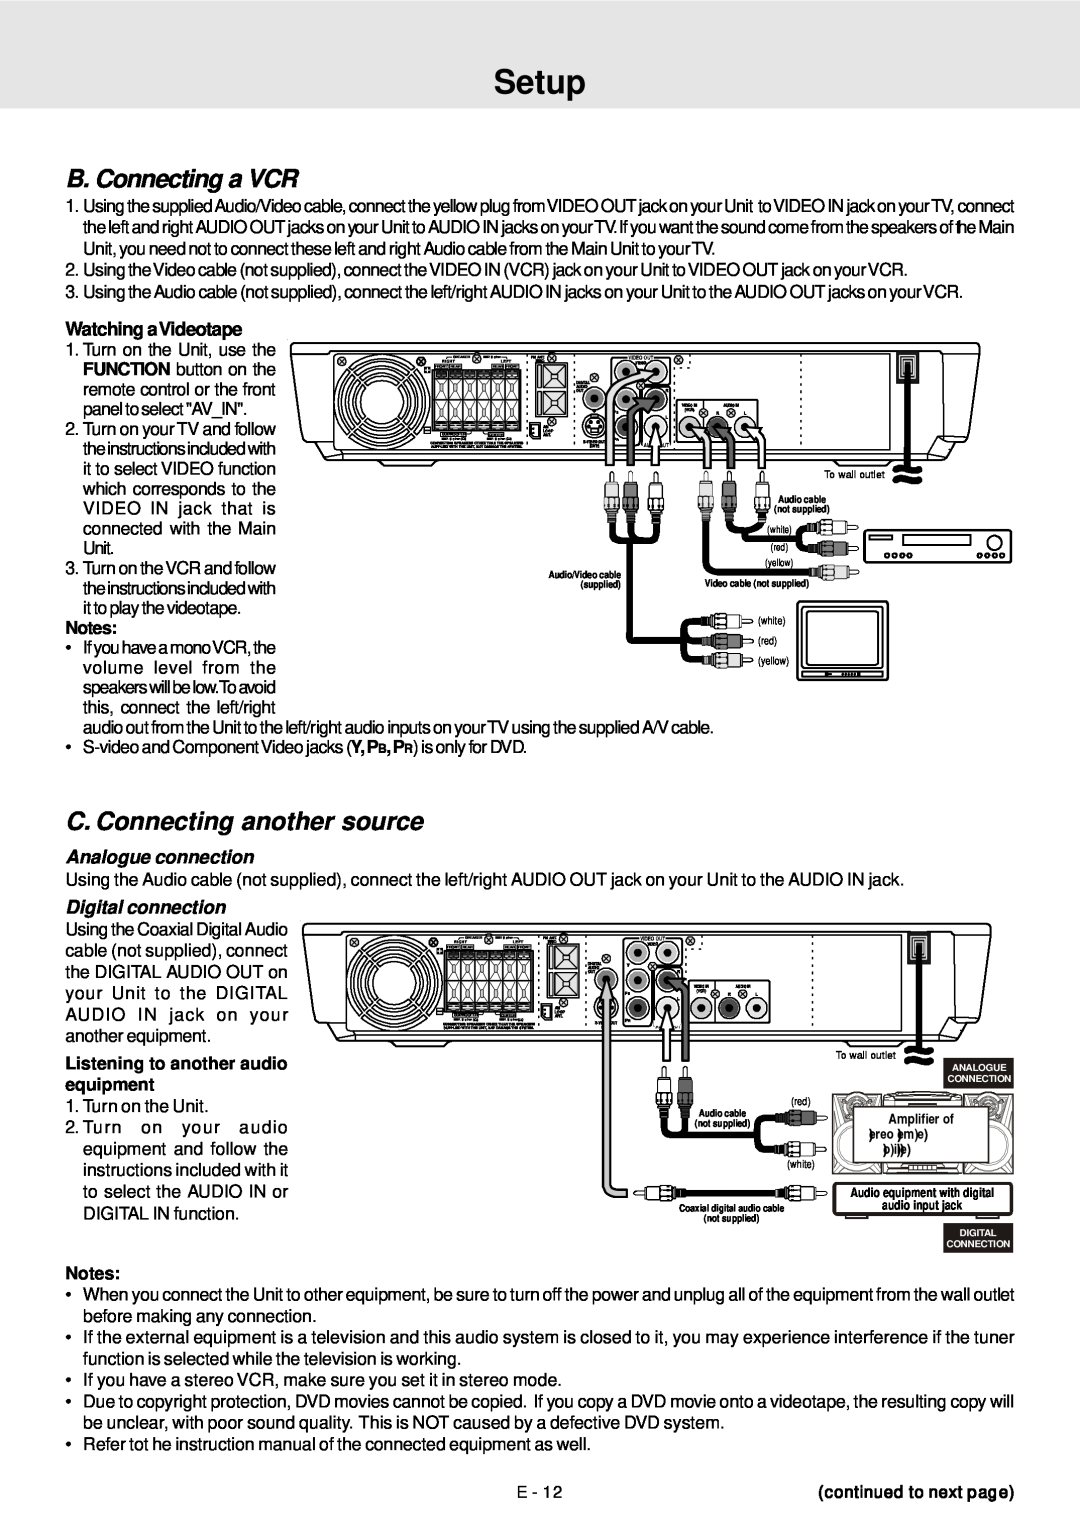 Venturer STS91 manual B. Connecting a VCR, C. Connecting another source, Setup, Analogue connection, Digital connection 